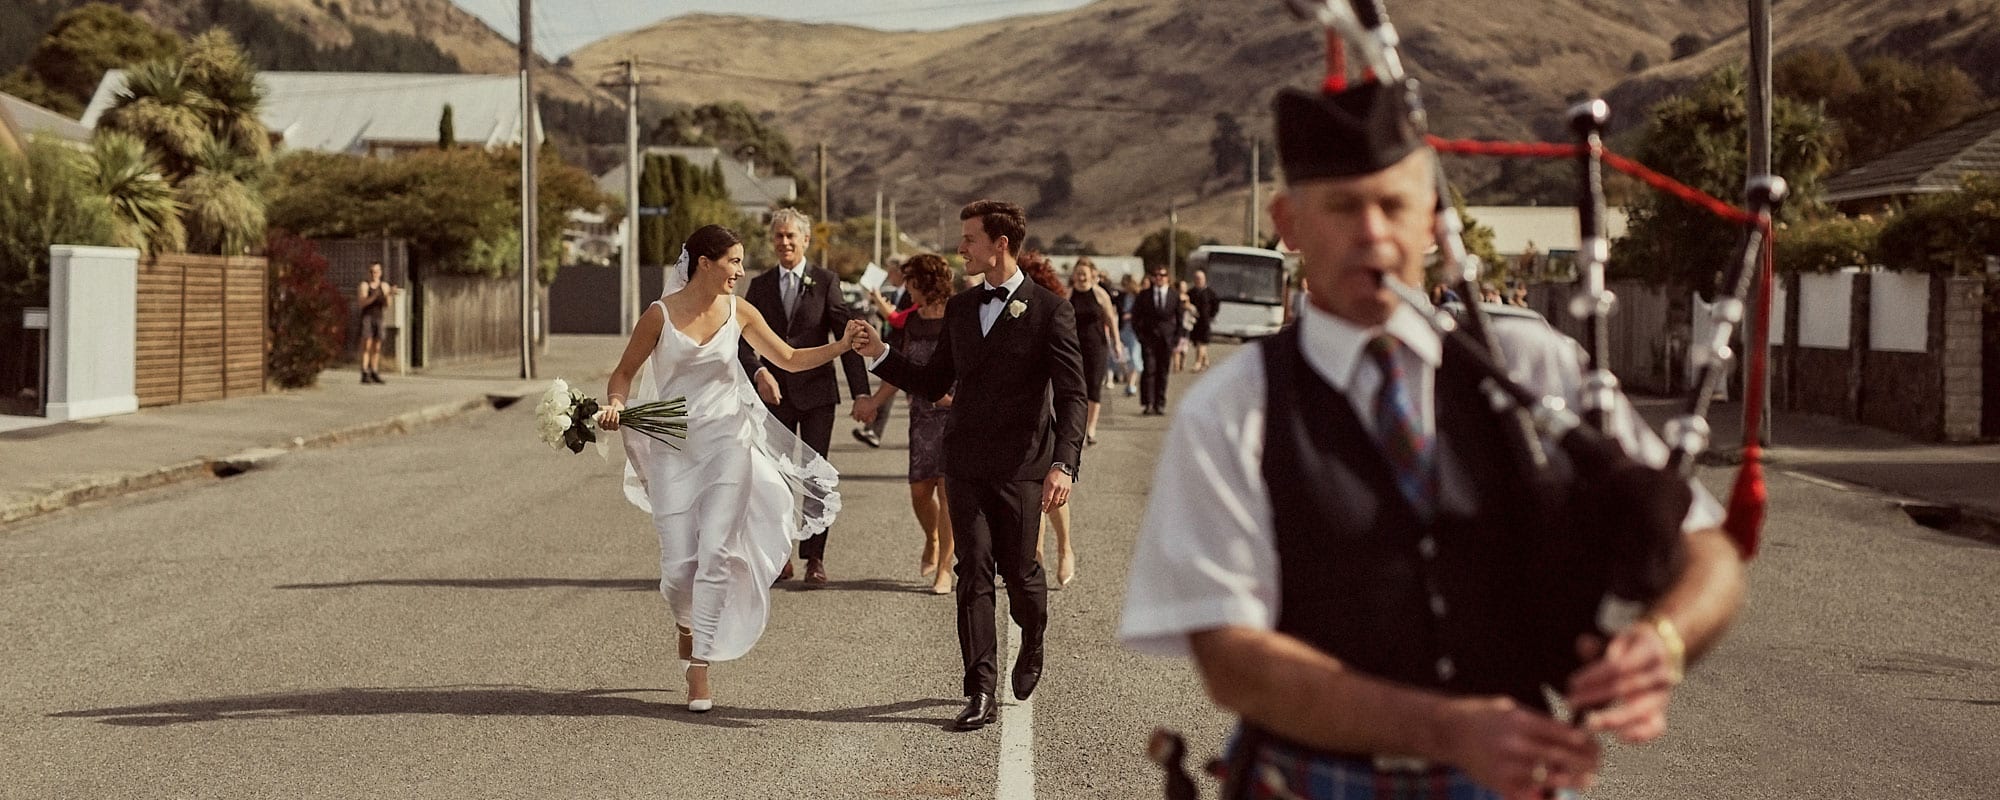 Wedding ceremony procession with bagpipe player